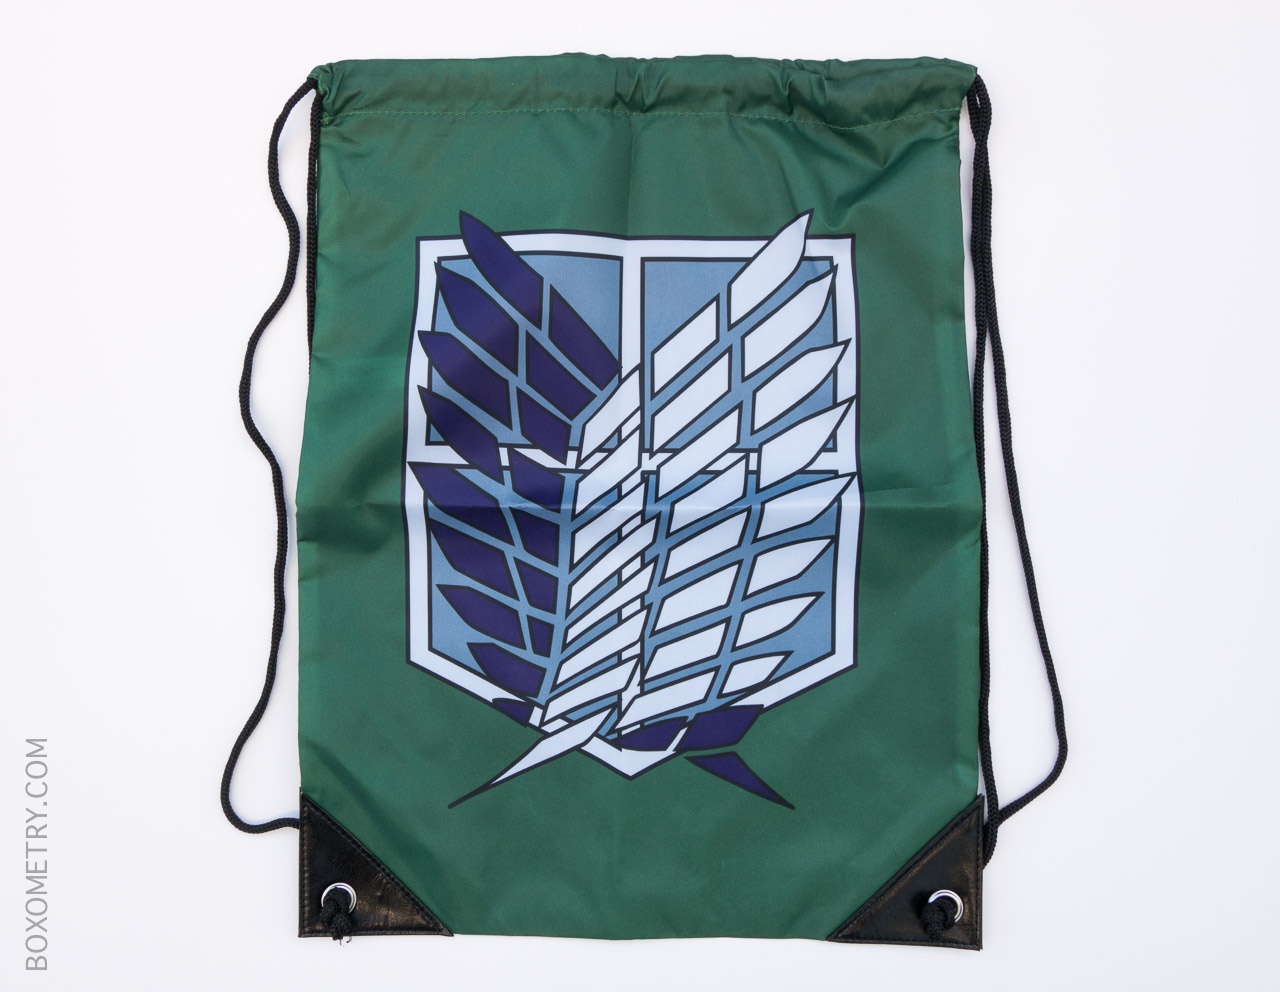 Boxometry Nerd Block May 2015 Review - Exclusive Attack on Titan Cinch Bag